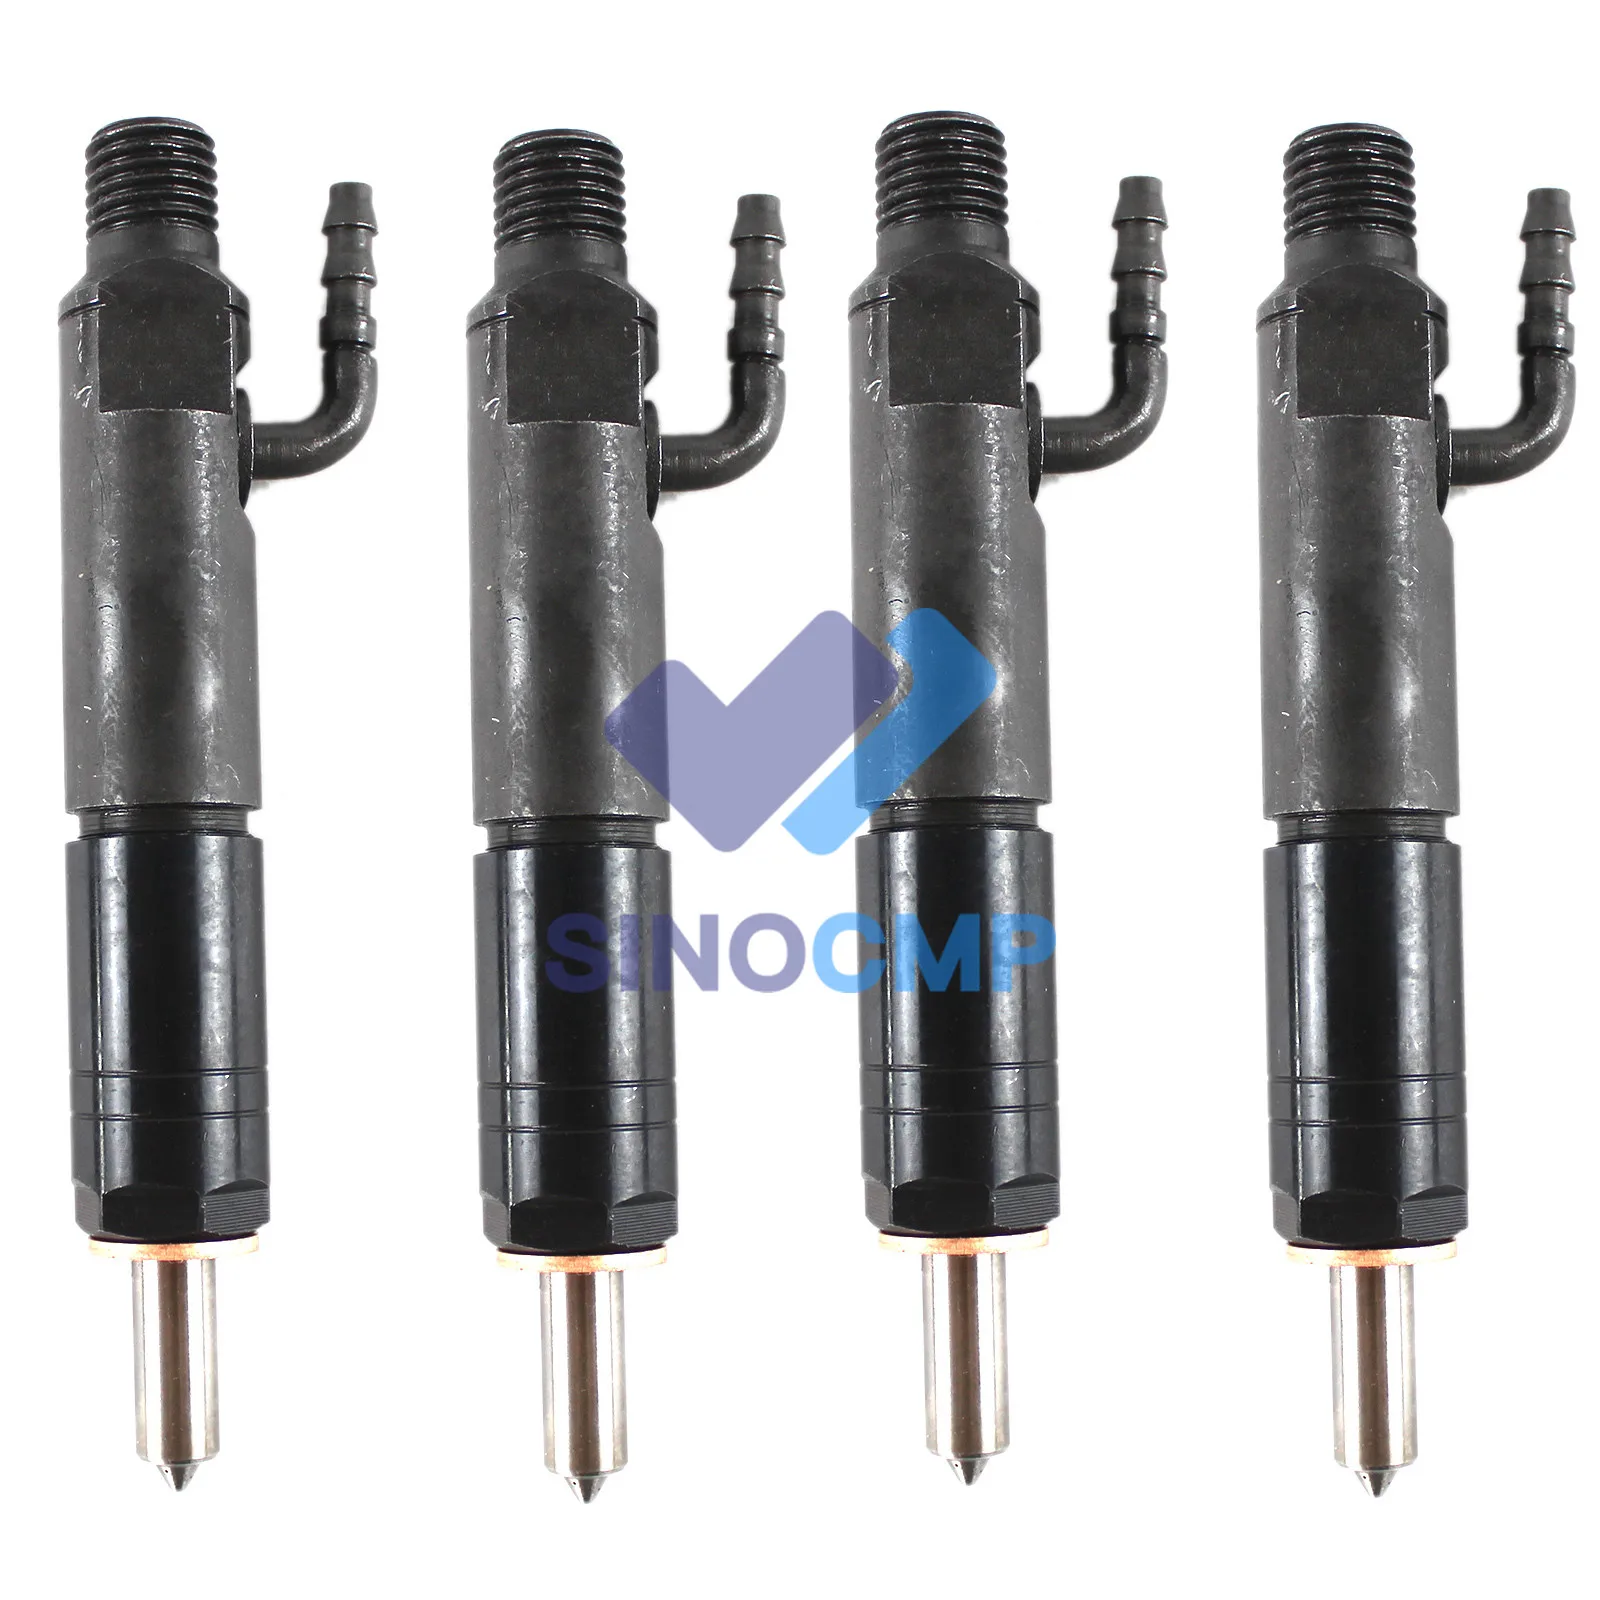 Enlarge 4PCS Fuel Injector 31538 31539 751-19700 for Lister Petter Engine LPW4 LPW3 LPW2